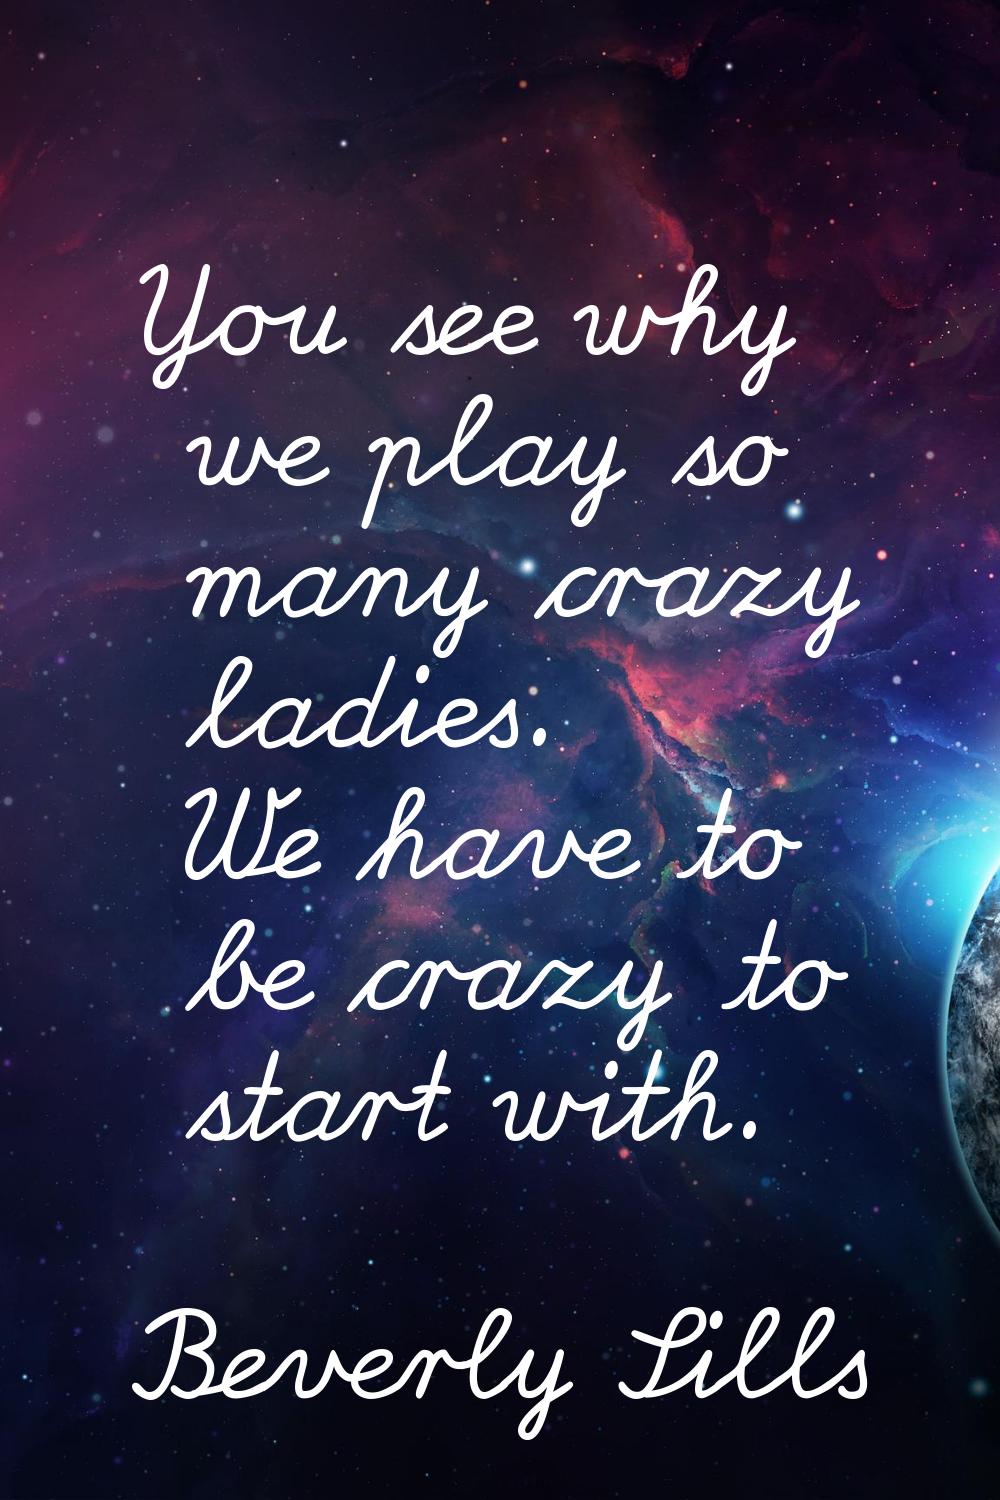 You see why we play so many crazy ladies. We have to be crazy to start with.